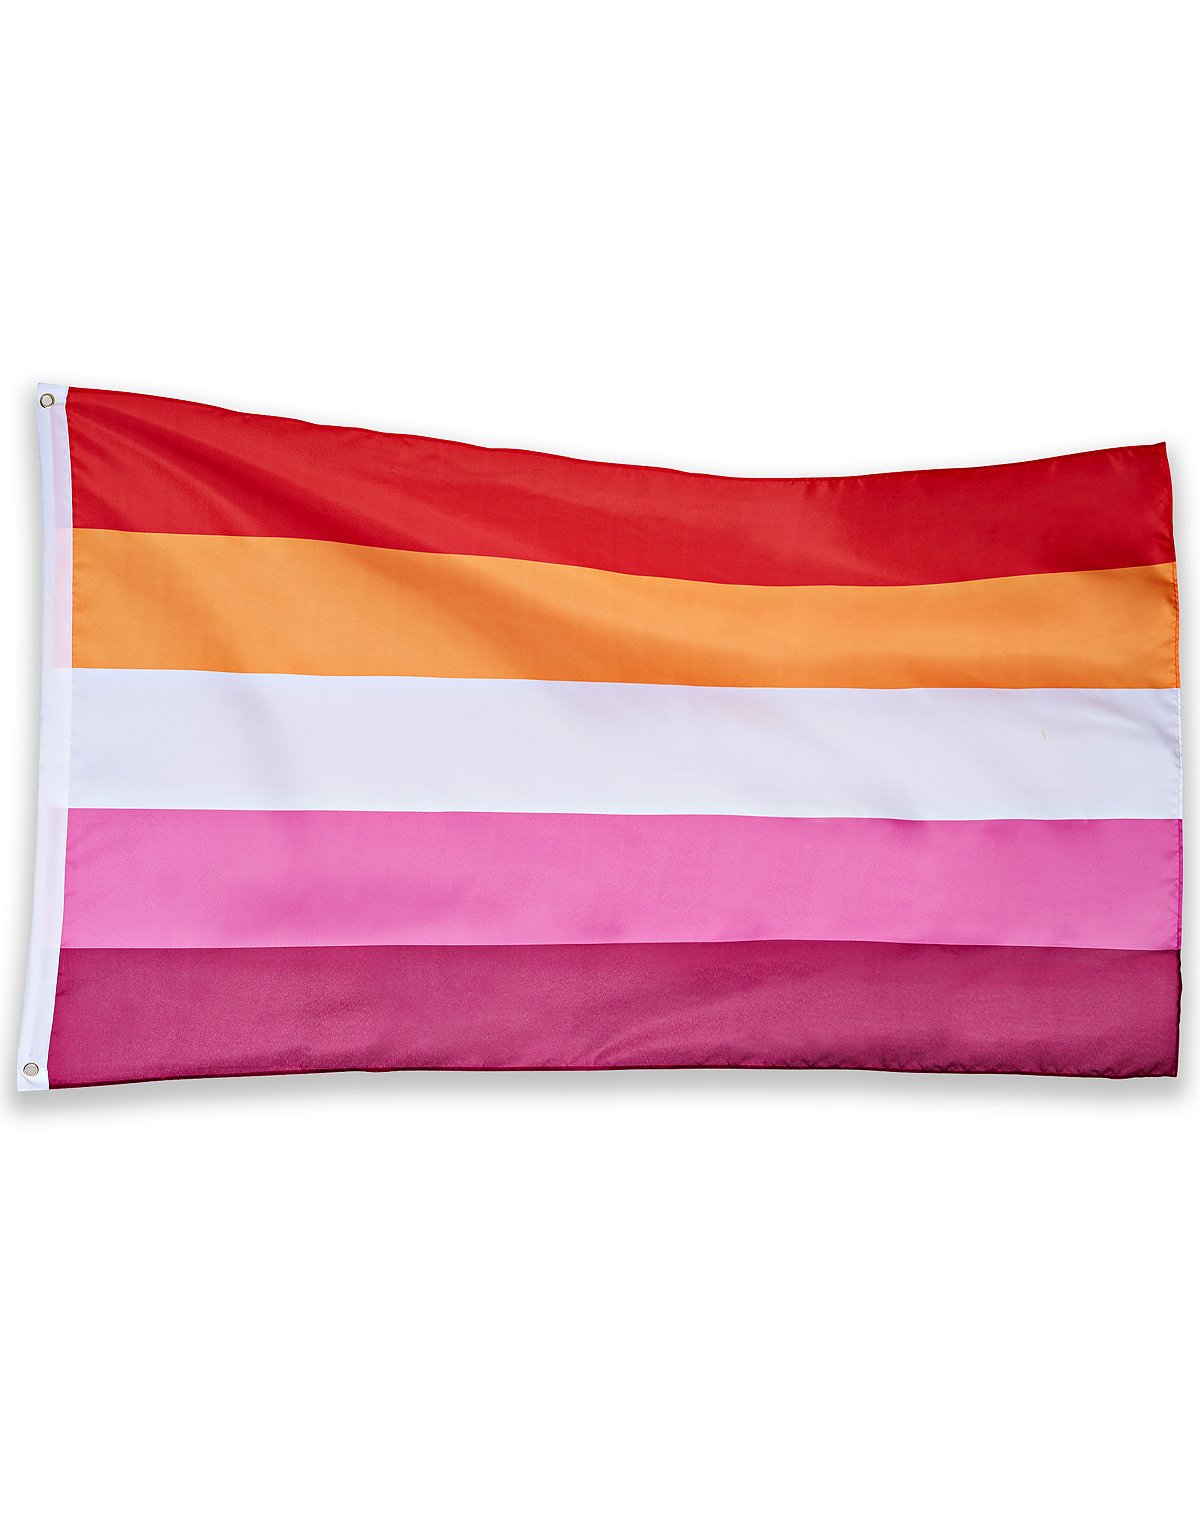 What The Lgbtq Pride Flags Mean The Inspo Spot